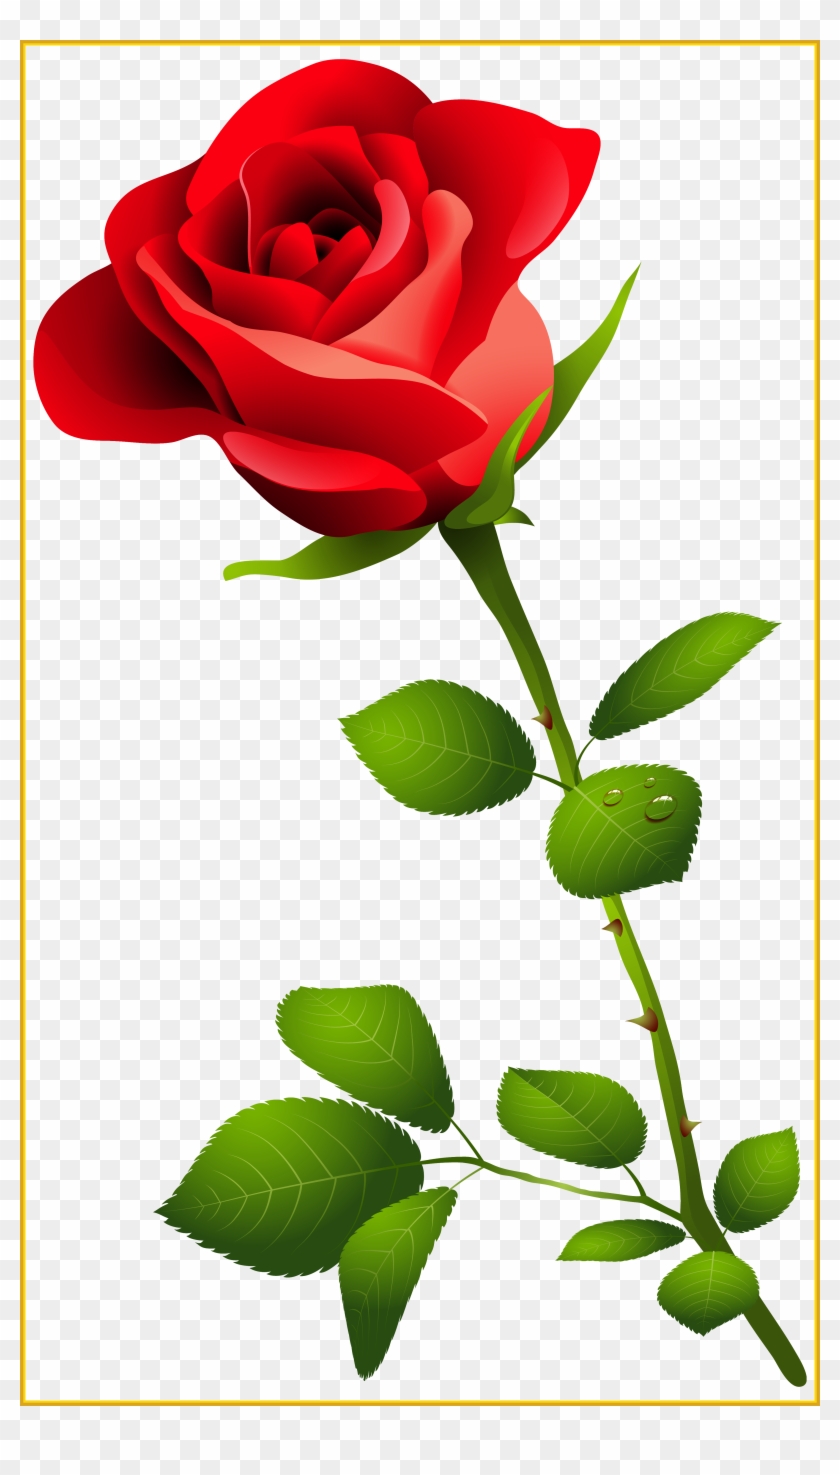 Awesome Red Rose With Stem Png Clipart Image Transparent - Awesome Red Rose With Stem Png Clipart Image Transparent #1334943